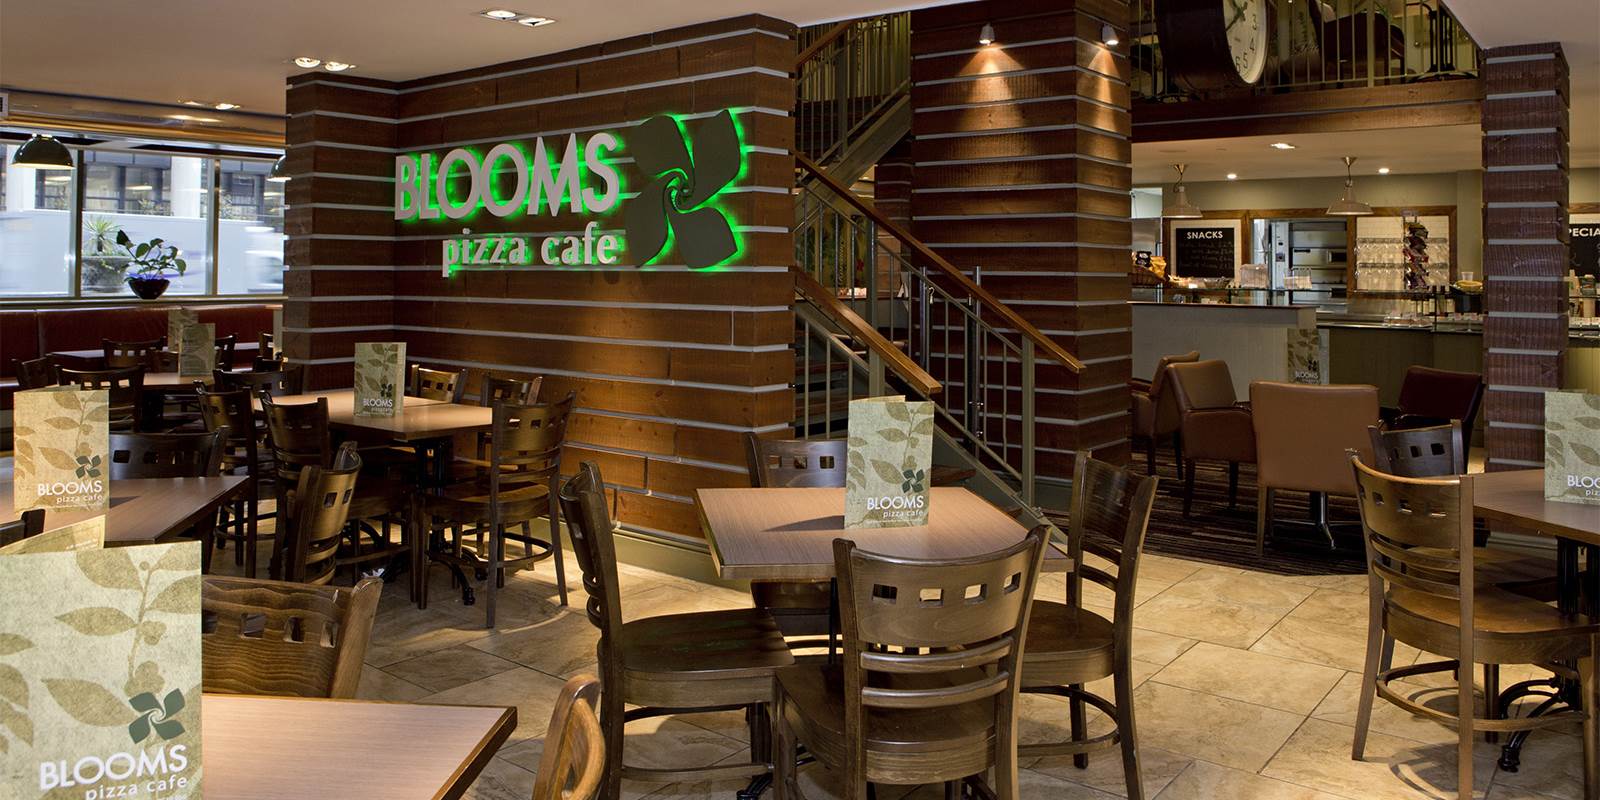 Blooms Pizza Cafe 2